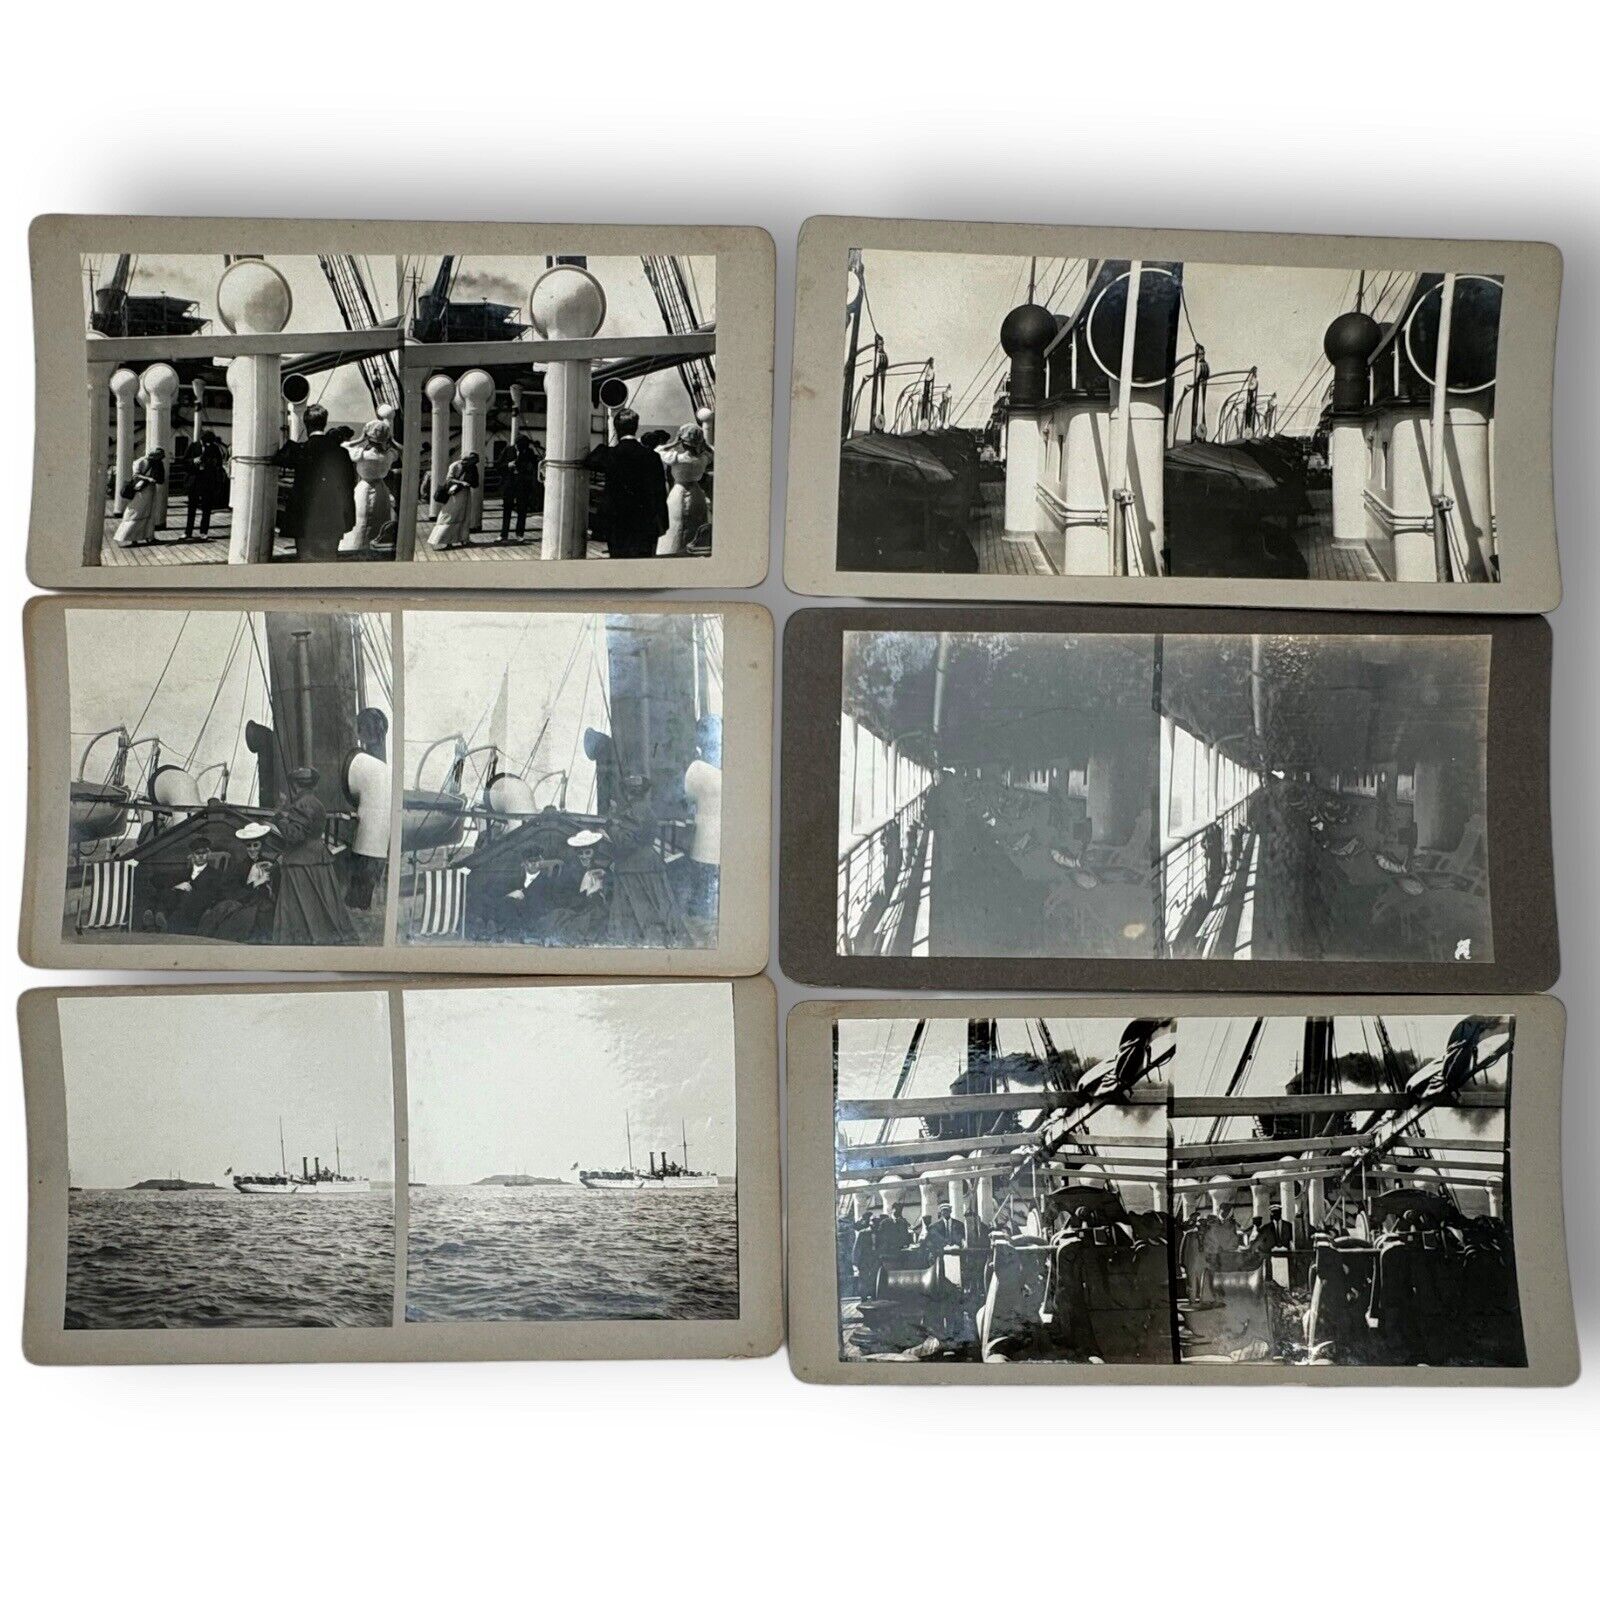 c1915 Lot of 6 - One of a Kind Family Travel Photo Stereoviews - Steamship